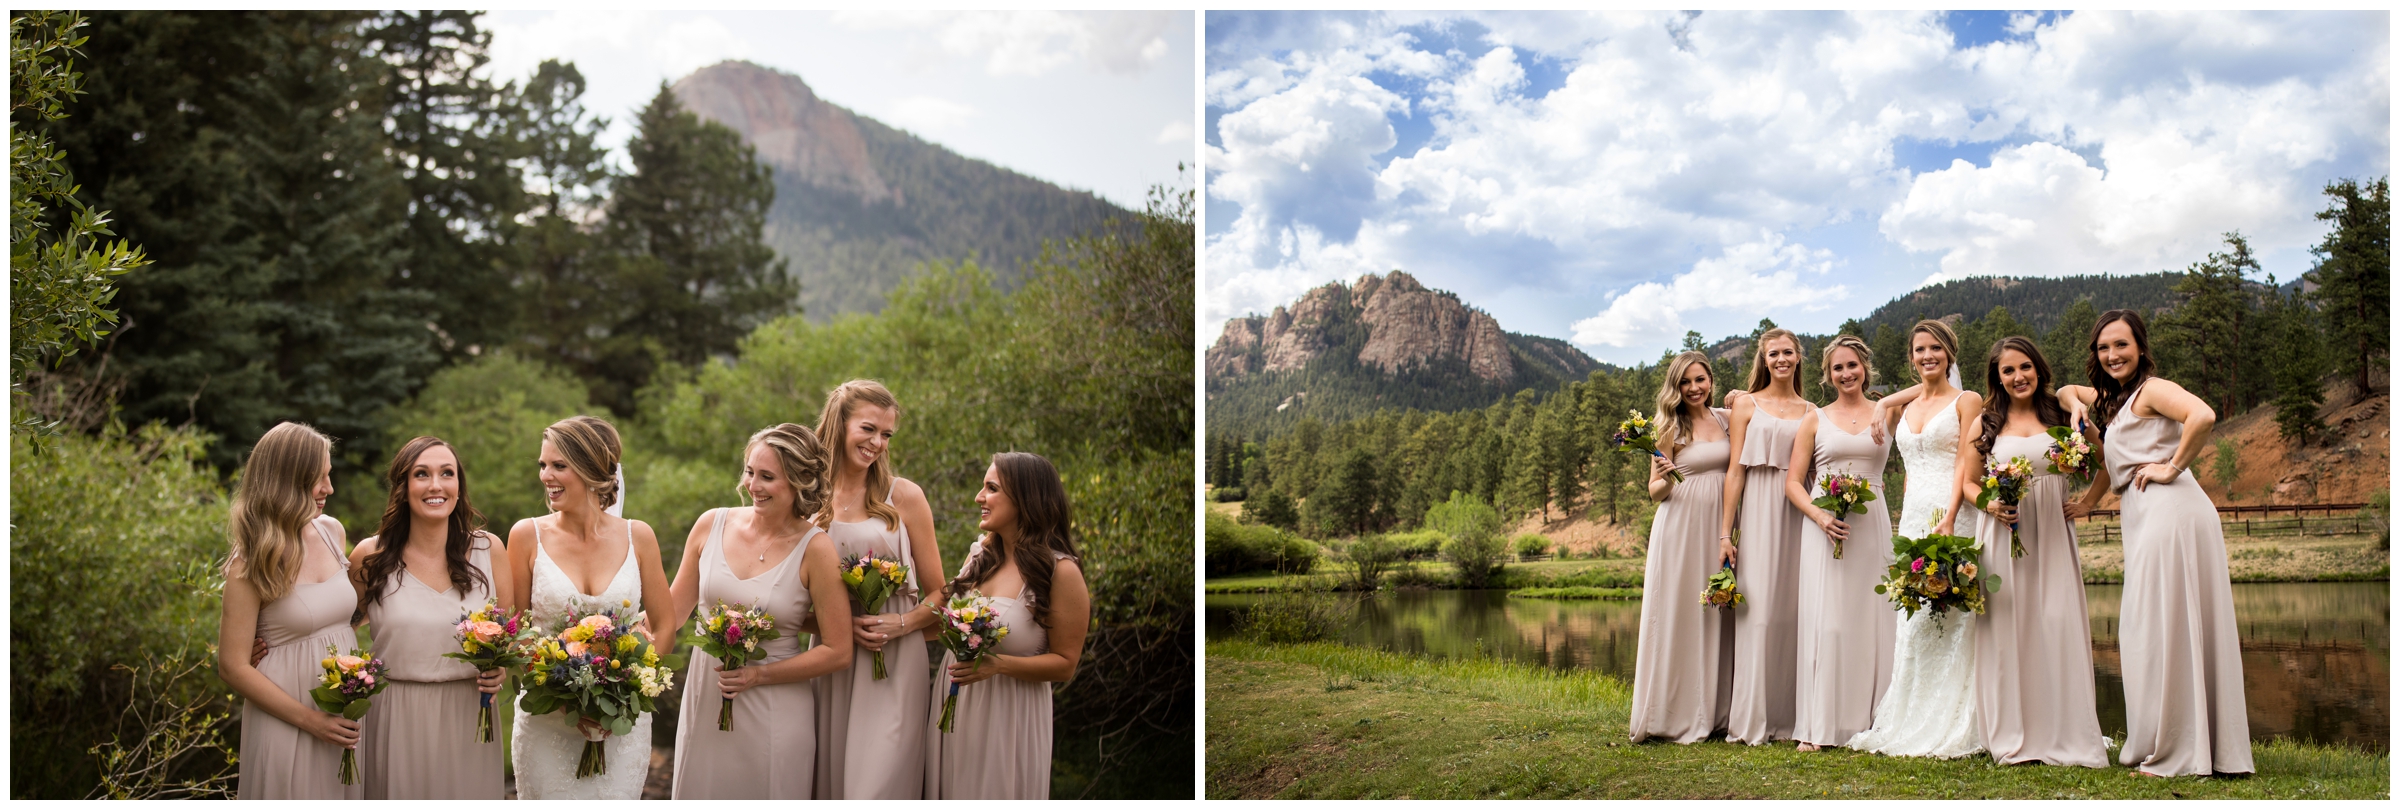 unique bridal party photos at Mountain View ranch wedgewood wedding